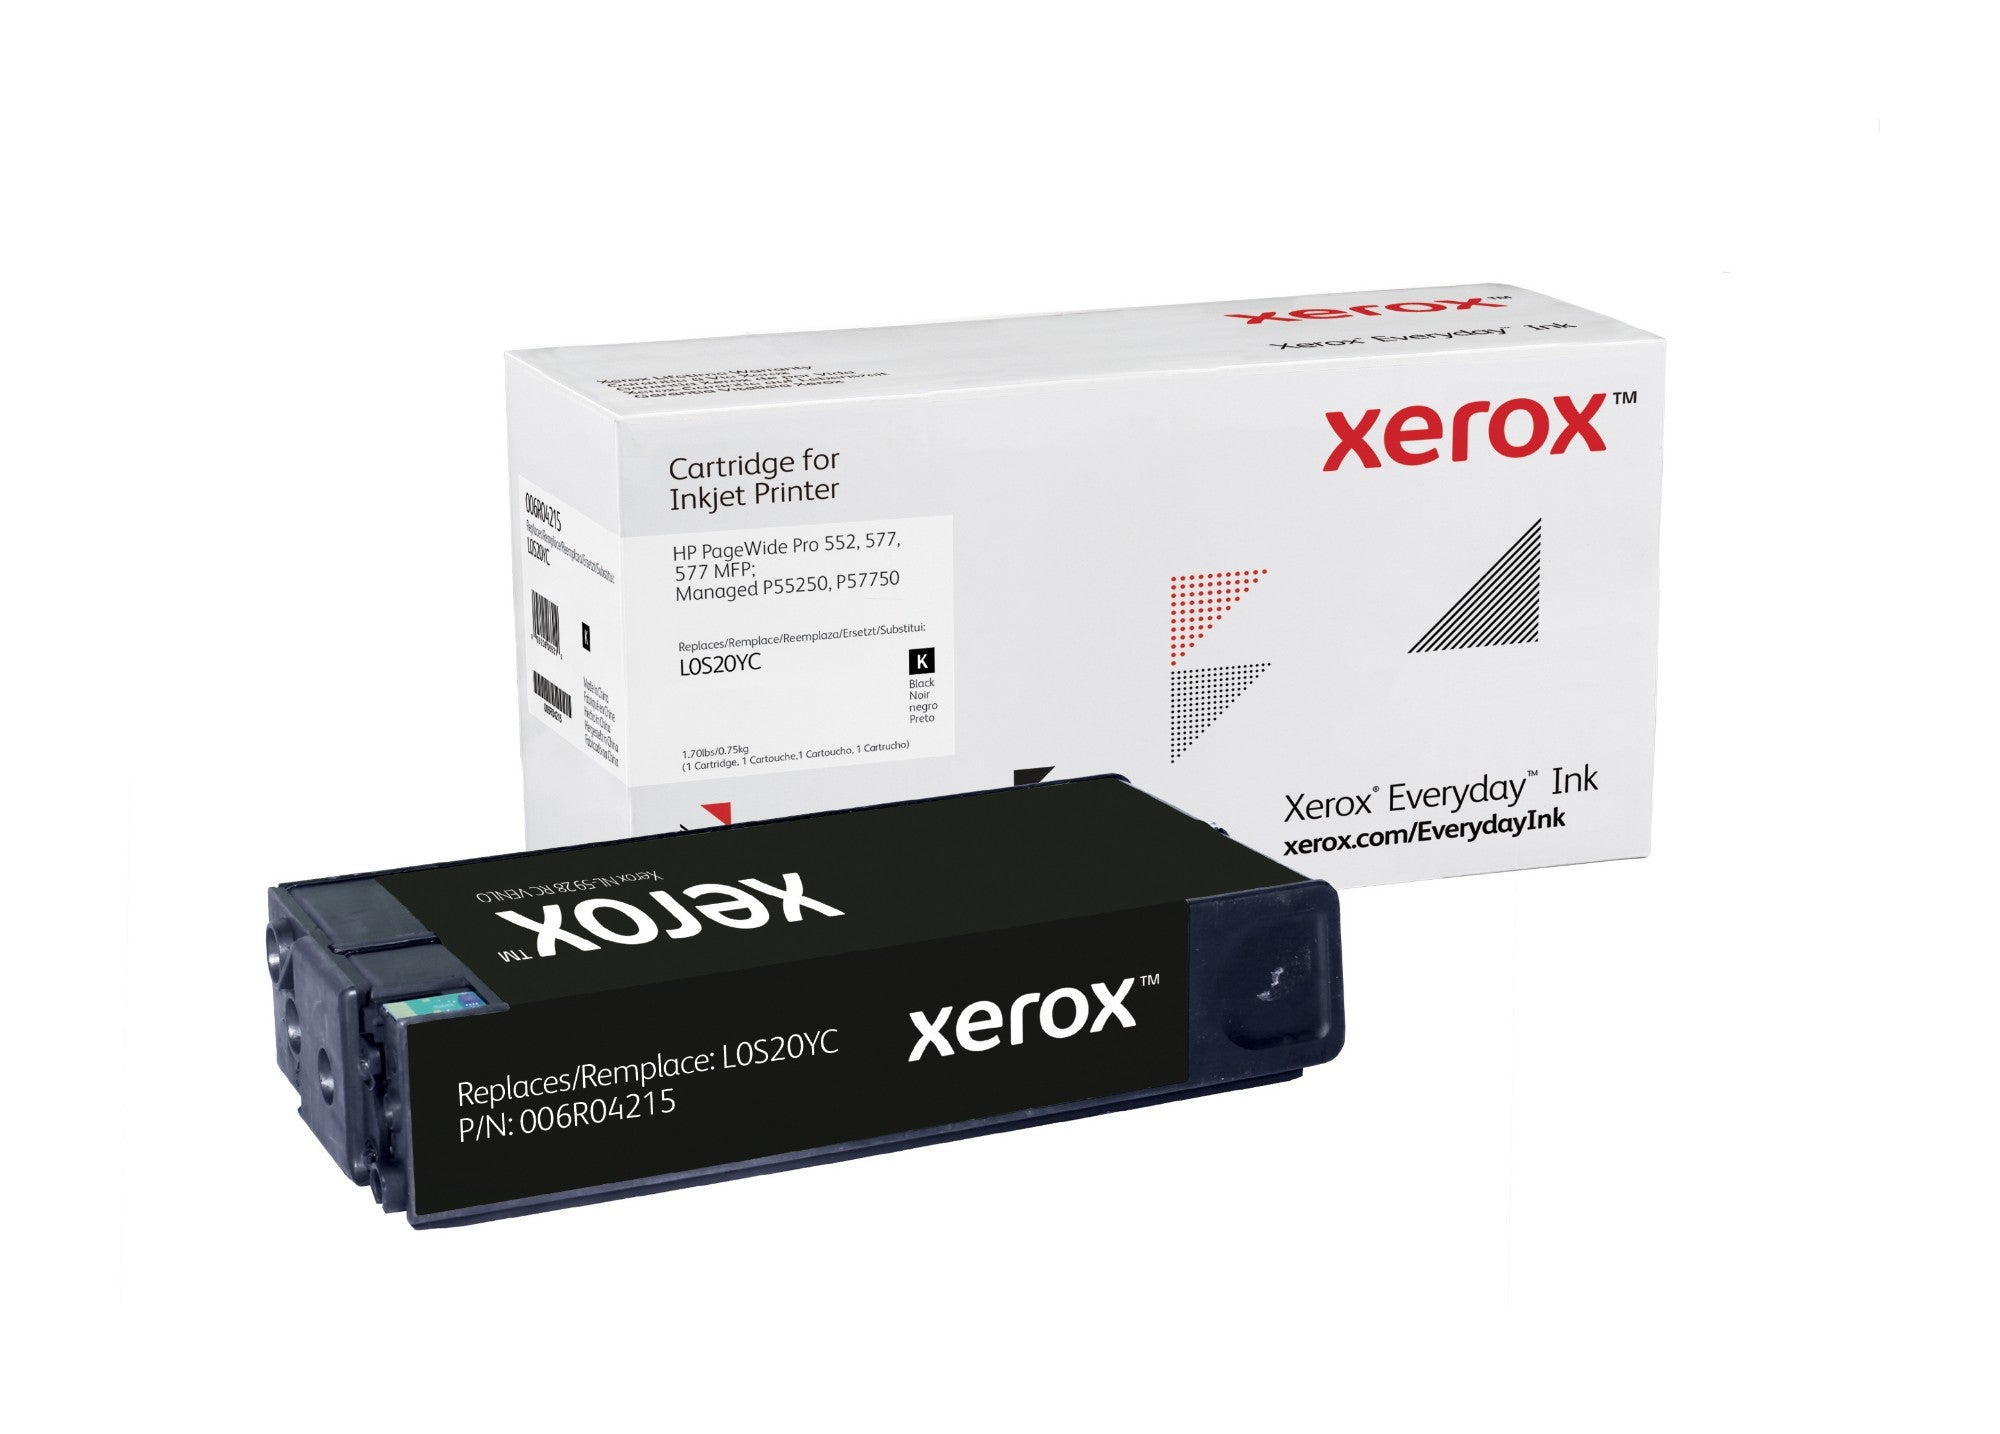 Xerox 006R04215 Ink Cartridge Black, 21K Pages (Replaces HP 976Yc) For HP Pagewide P 55250-(006R04215)